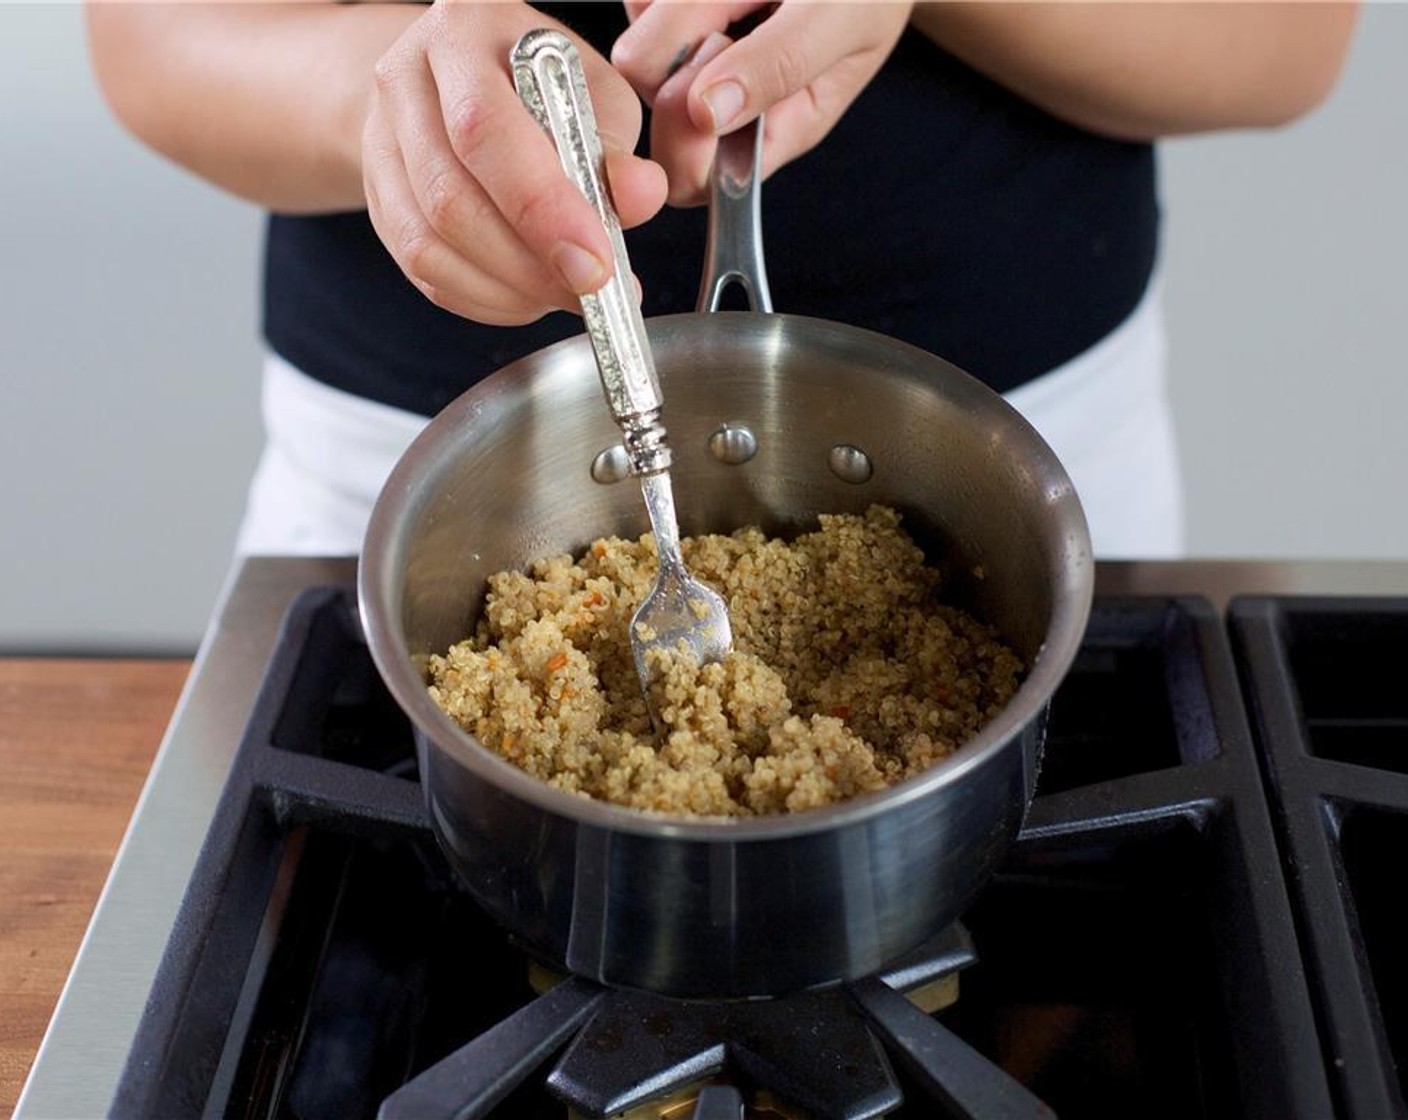 step 1 In a small saucepan over medium high heat, bring one and a half cups of water to a boil. Add Garden Vegetable Quinoa (1 pckg) and return to a boil. Reduce heat to low, cover, and let simmer for 15 minutes. Remove from heat and keep warm.